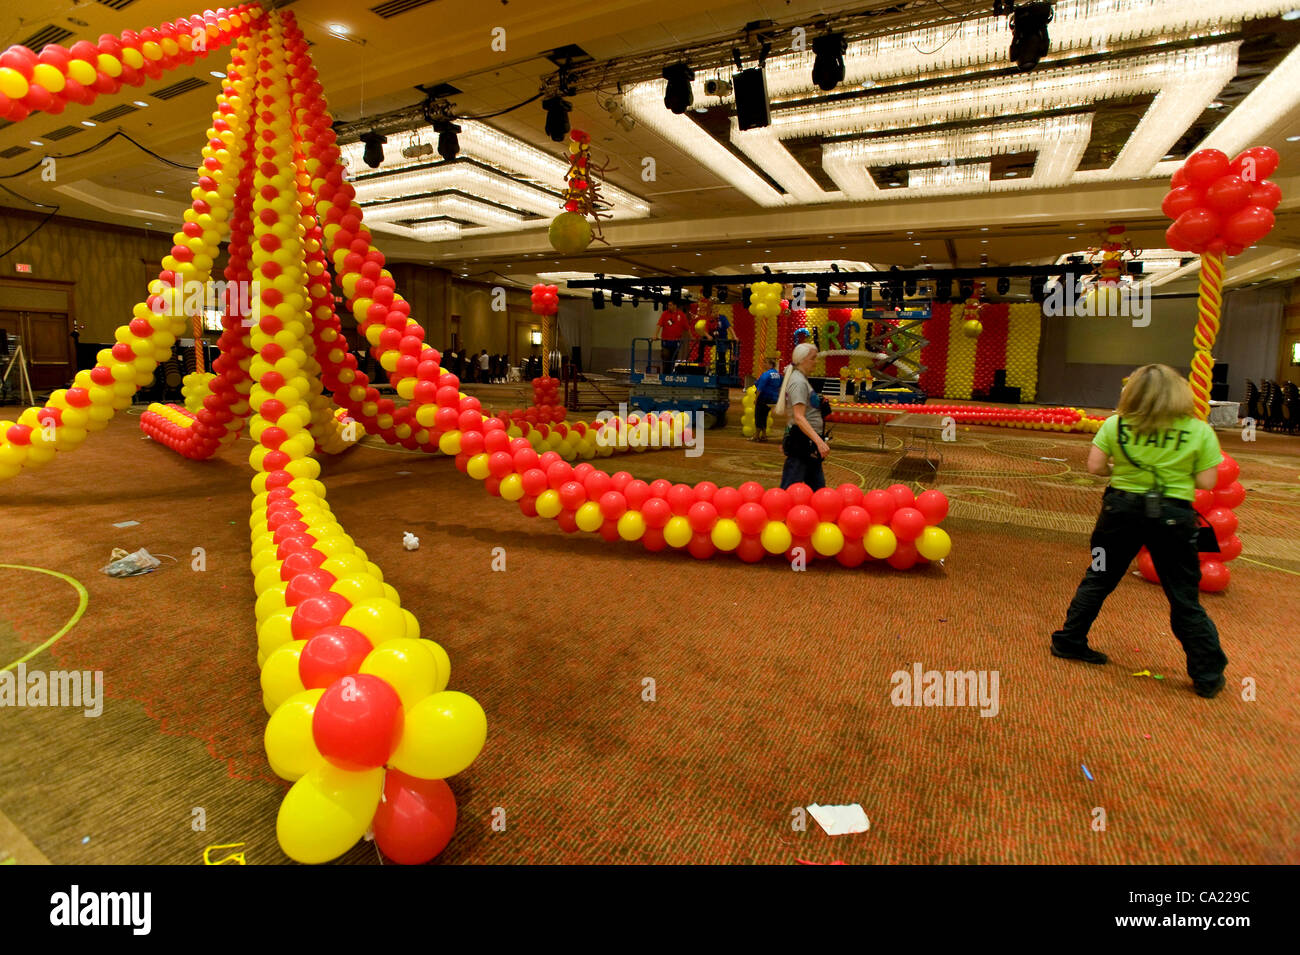 March 22, 2012 - Dallas, Texas, USA -  Balloon decorations are readied for the evening's costume party during the biennial World Balloon Convention at the Sheraton Dallas Hotel.  Attended by approximately 700 balloon artistry delegates and competitors from 46 countries, the WBC features sculptire co Stock Photo